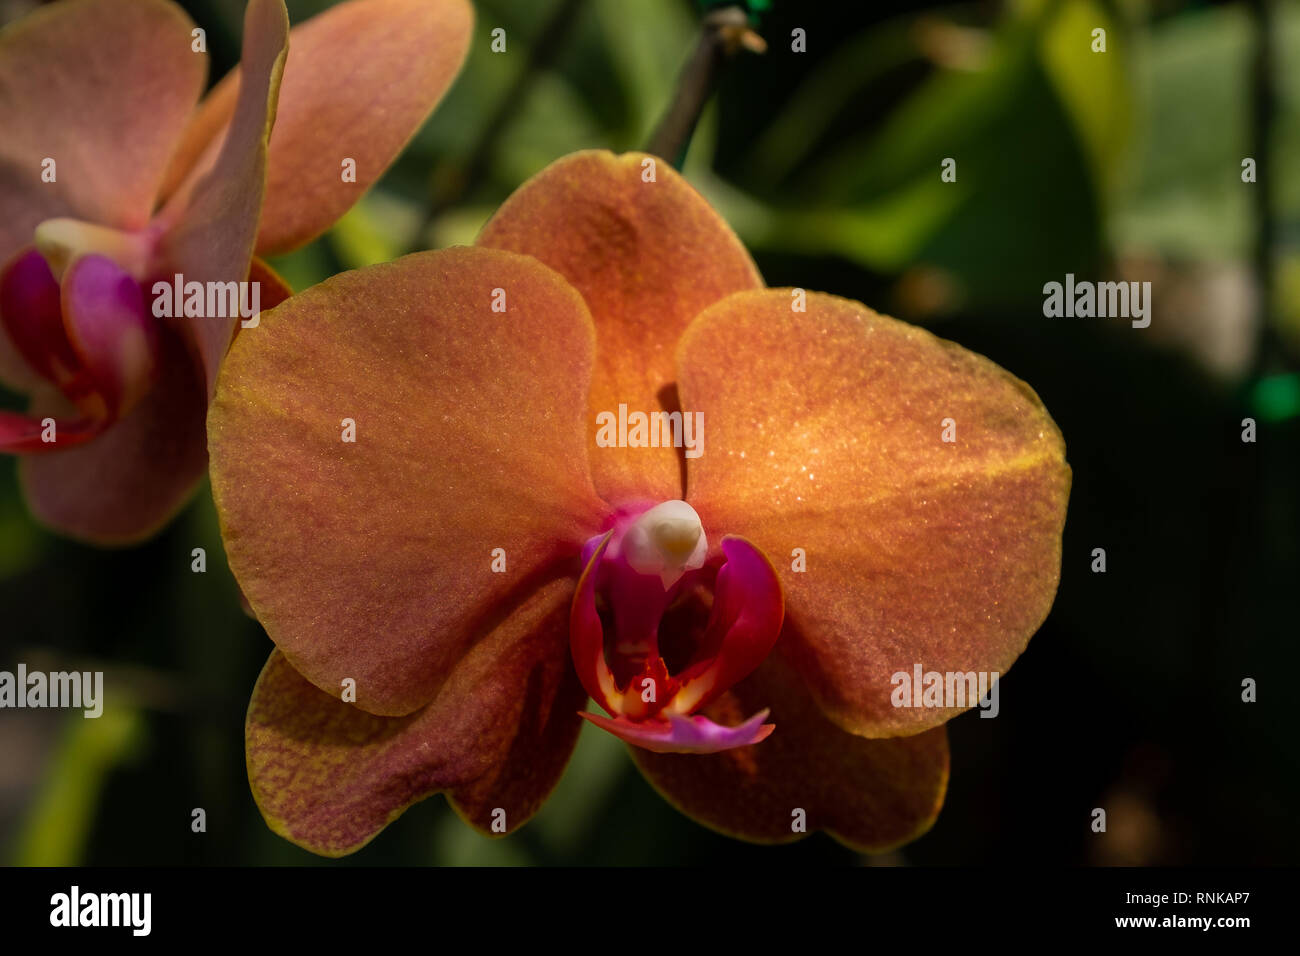 A close up of single orange Thai orchid flower head against a green foliage background Stock Photo